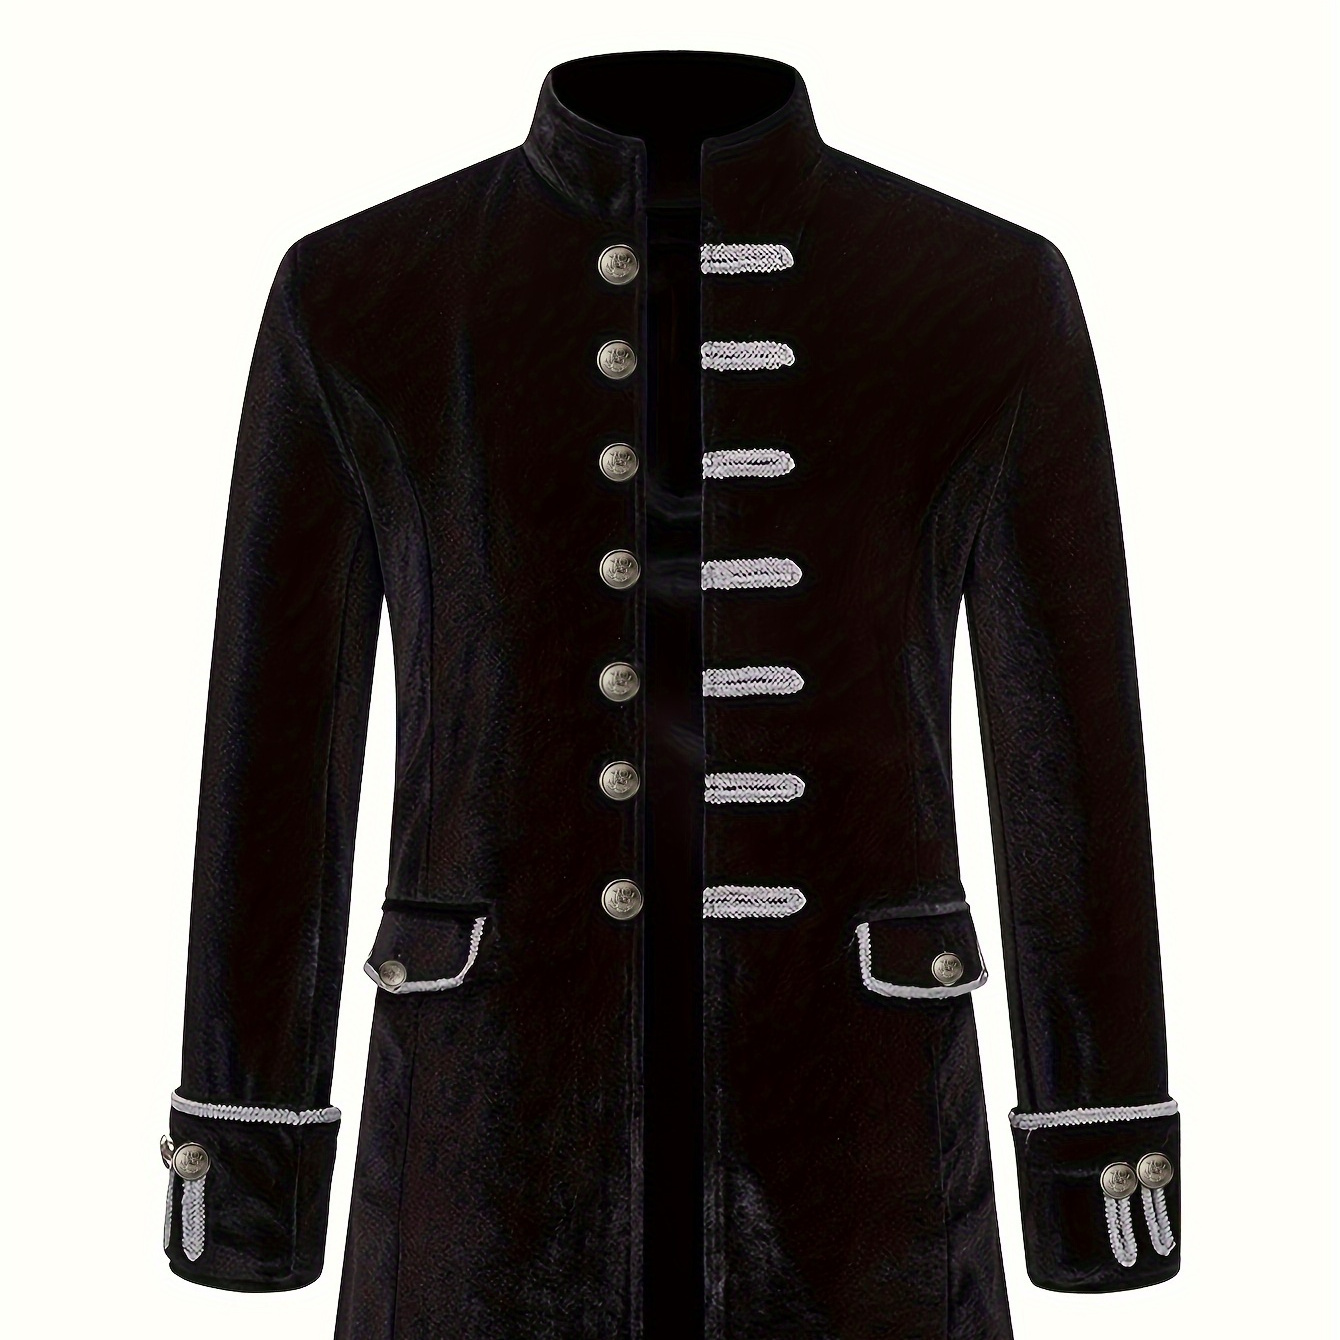 

Men's Medieval Steampunk Vintage Stand Collar Coat, Solid Color Elegant Fashionable Retro Uniform, Euro-american Overcoat With Metallic Buttons, Costume Clothing